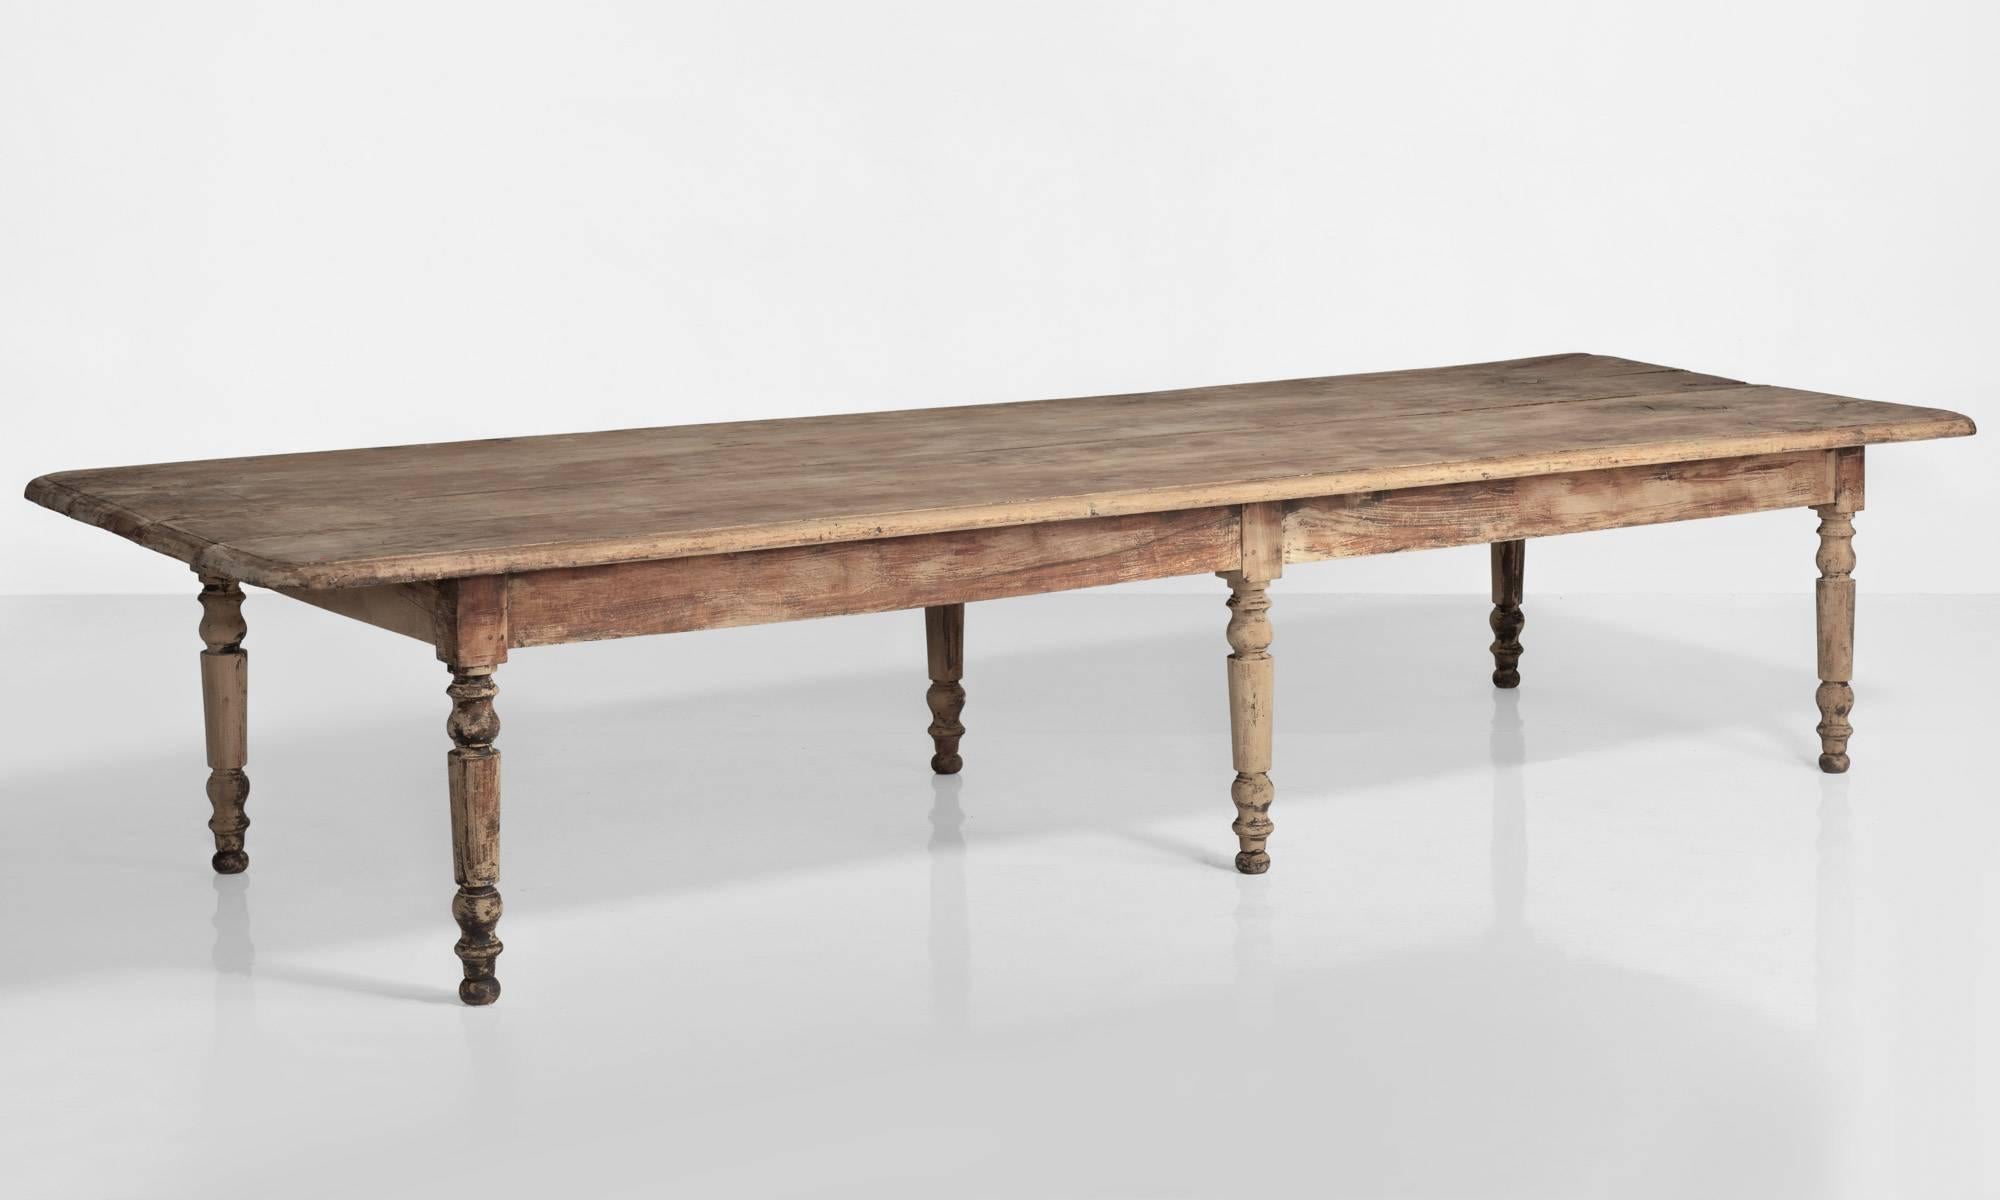 Massive walnut dining table, France, circa 1850.

Bleached walnut table with handsome turned legs.

Measures: 156” W x 53” D x 30.75” H

Overhang
12.5”

Apron
23.75” H.